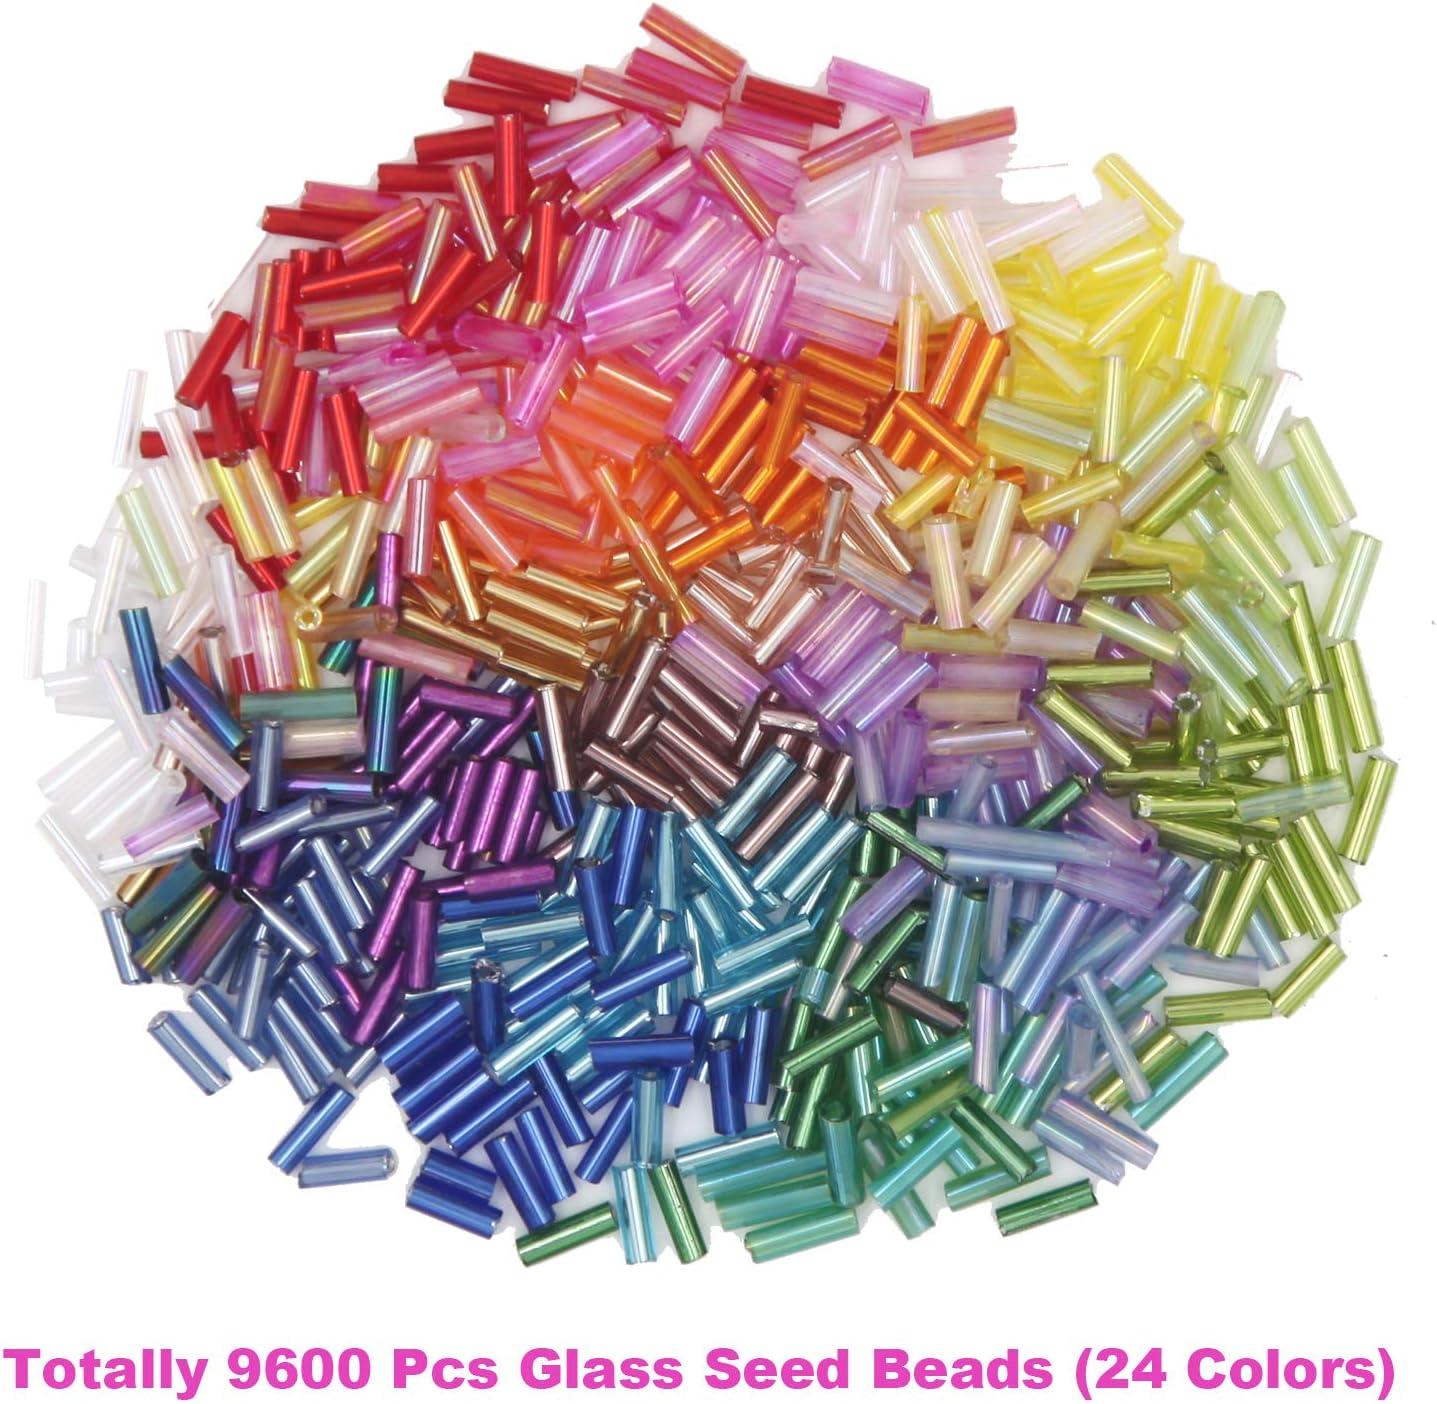 EuTengHao 13200Pcs Glass Seed Beads Small Craft Beads Small Beads for DIY  Bracelet Necklaces Crafting Jewelry Making Supplies with Two 0.6mm Clear